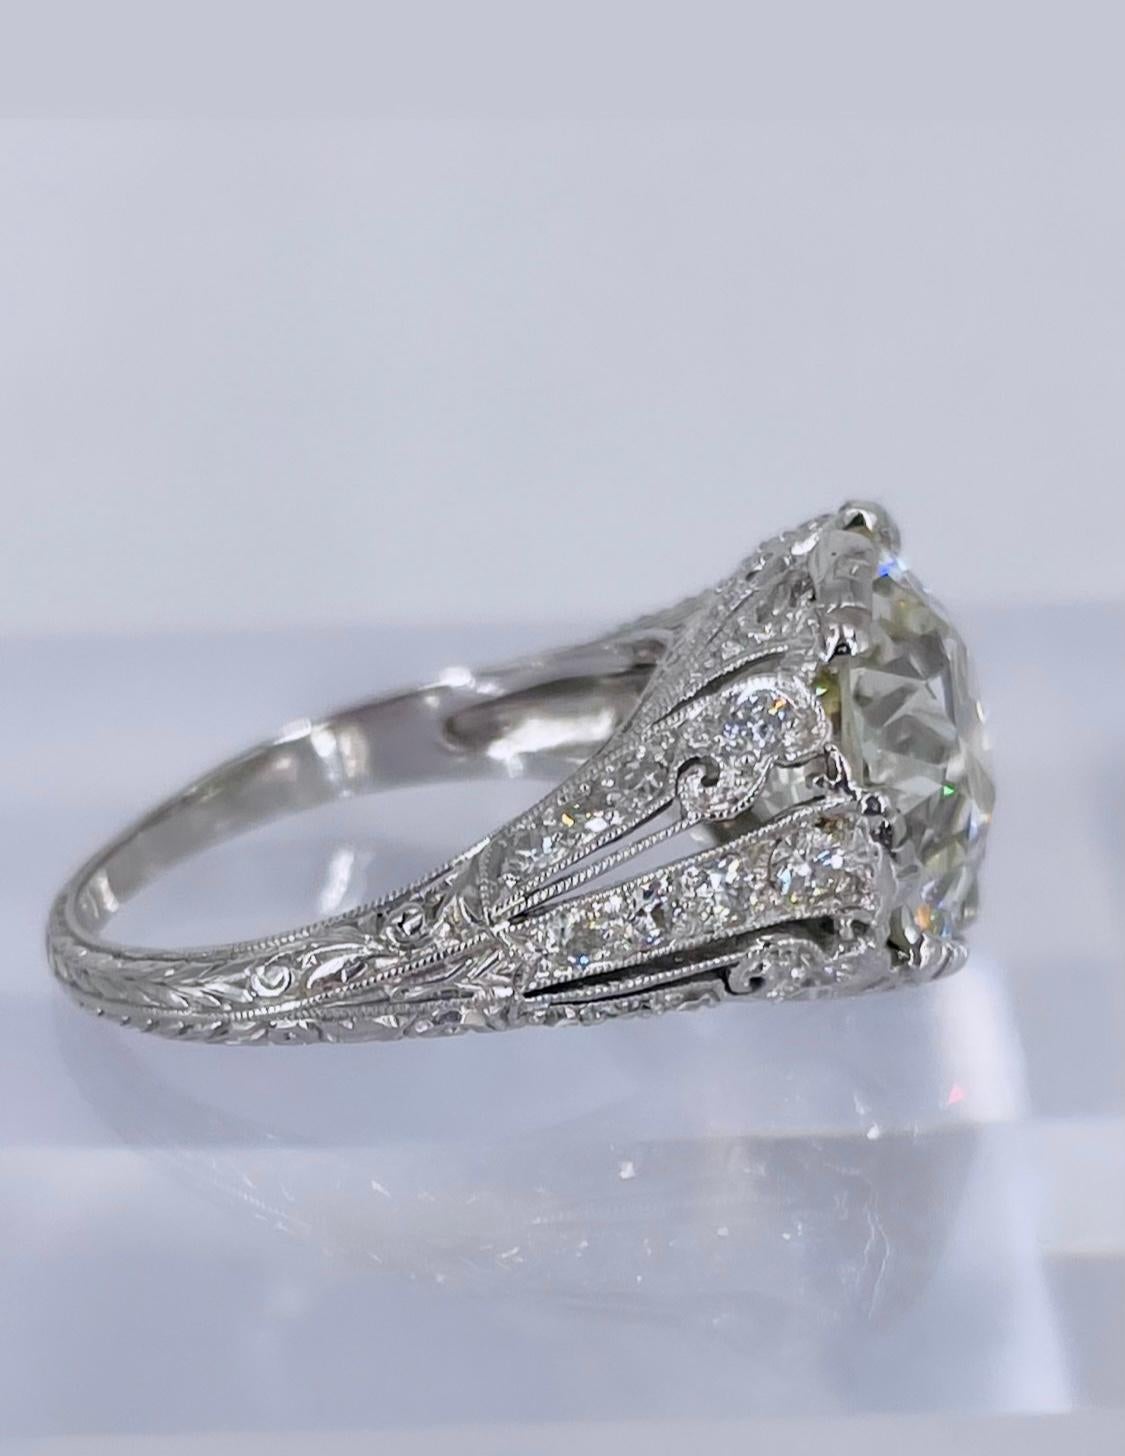 This exquisite antique platinum ring features all of the detail, craftsmanship and charm of the Art Deco period. The diamond is a gorgeous 5.57 carat European cut certified by GIA as L color and VS2 clarity. The diamond appears significantly whiter